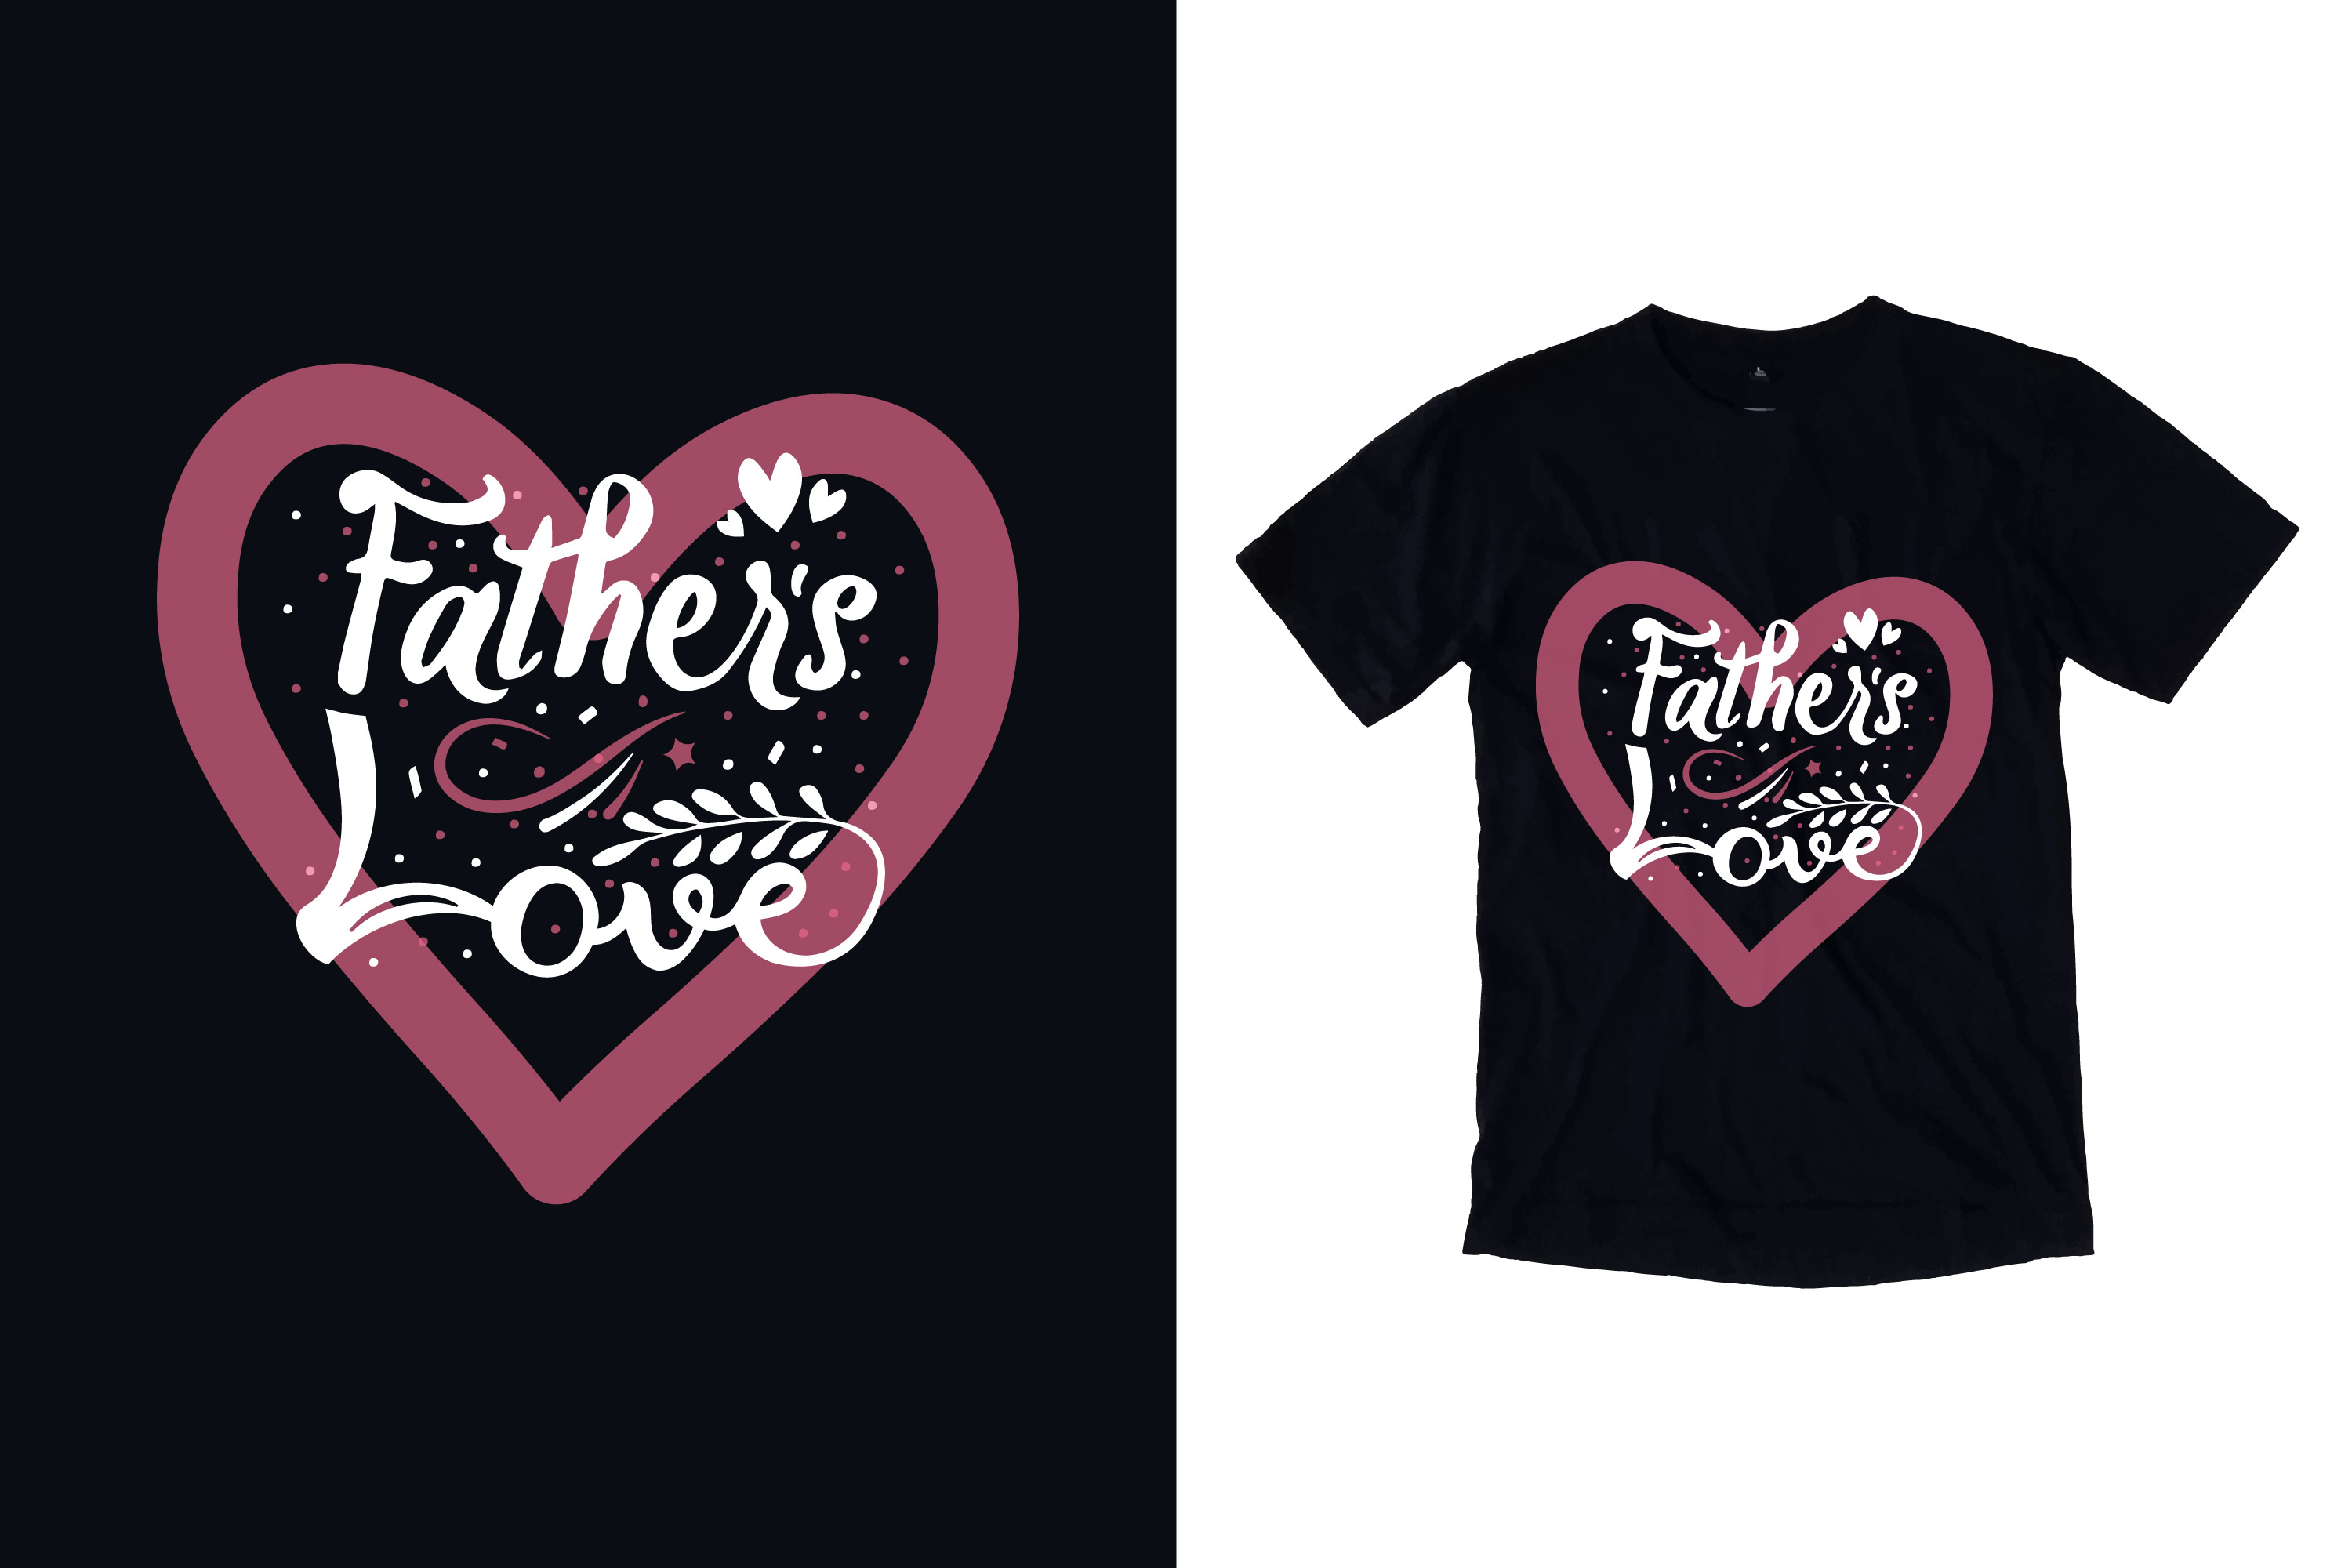 Image of a black t-shirt with an amazing print on the theme of fatherhood.